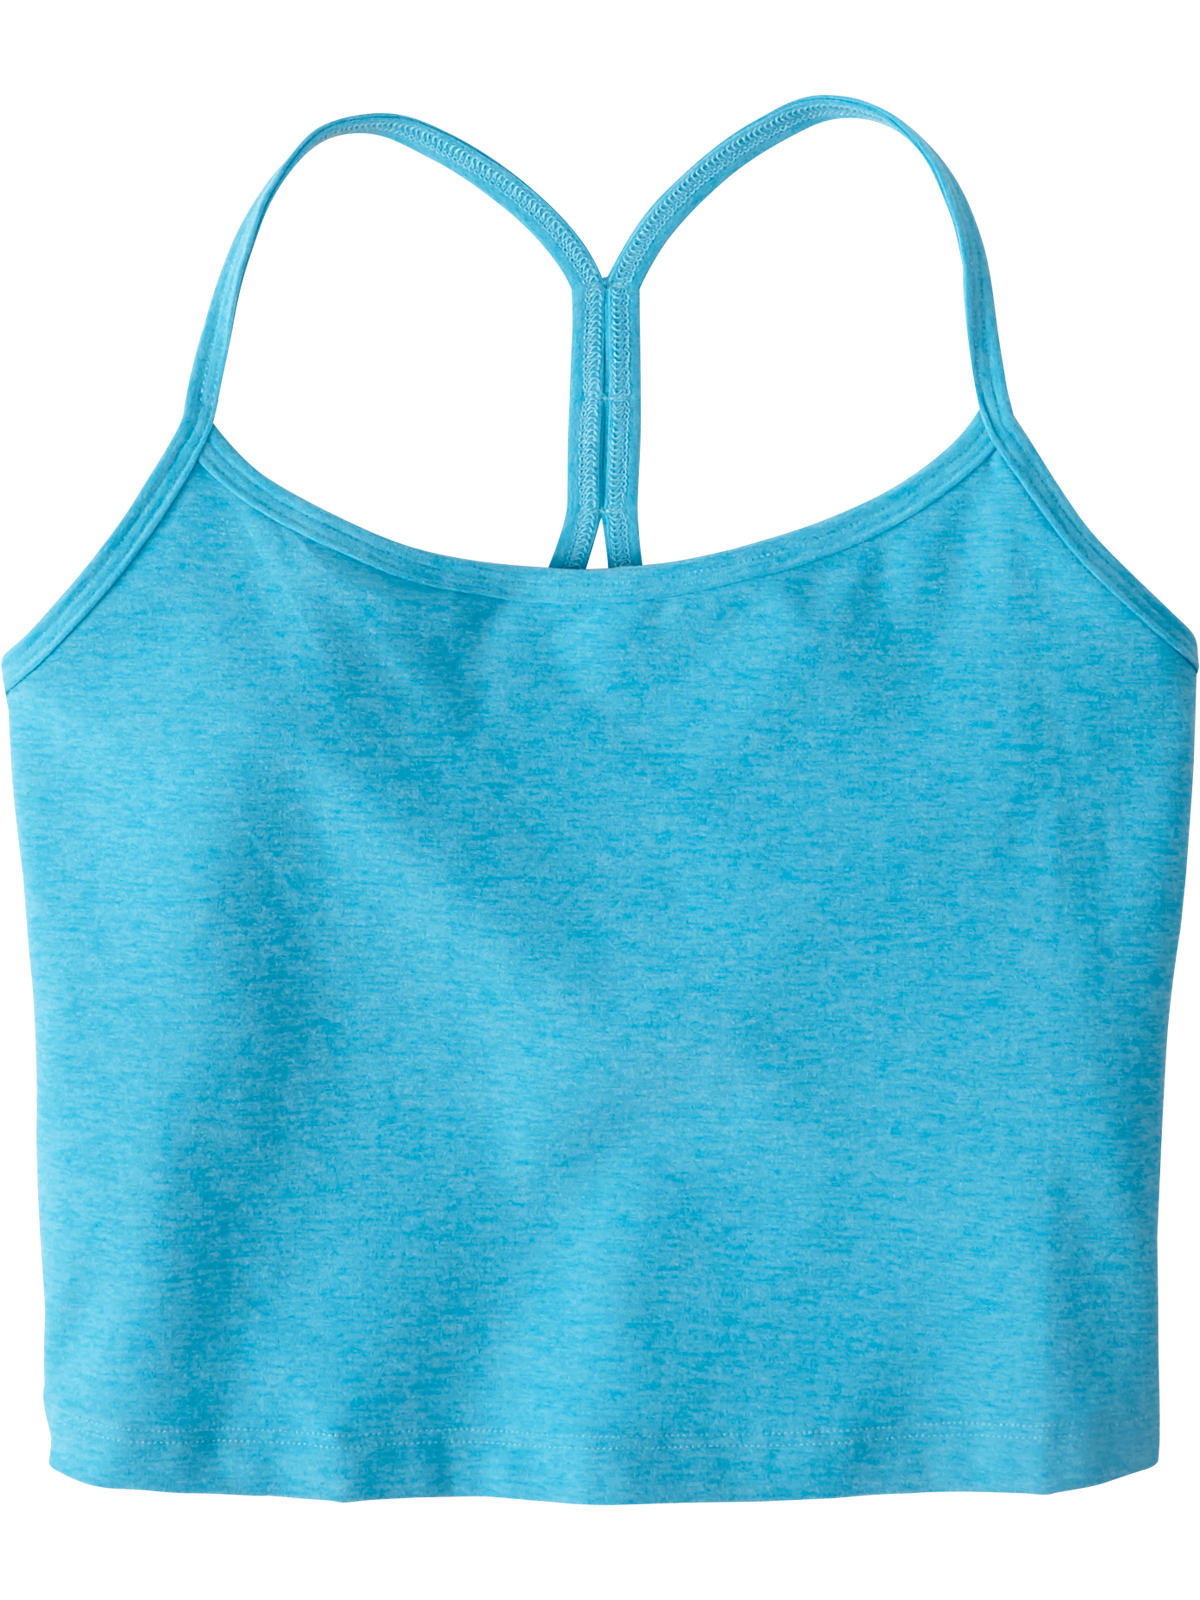 Women's Athletic Tops & Workout Tops | Title Nine